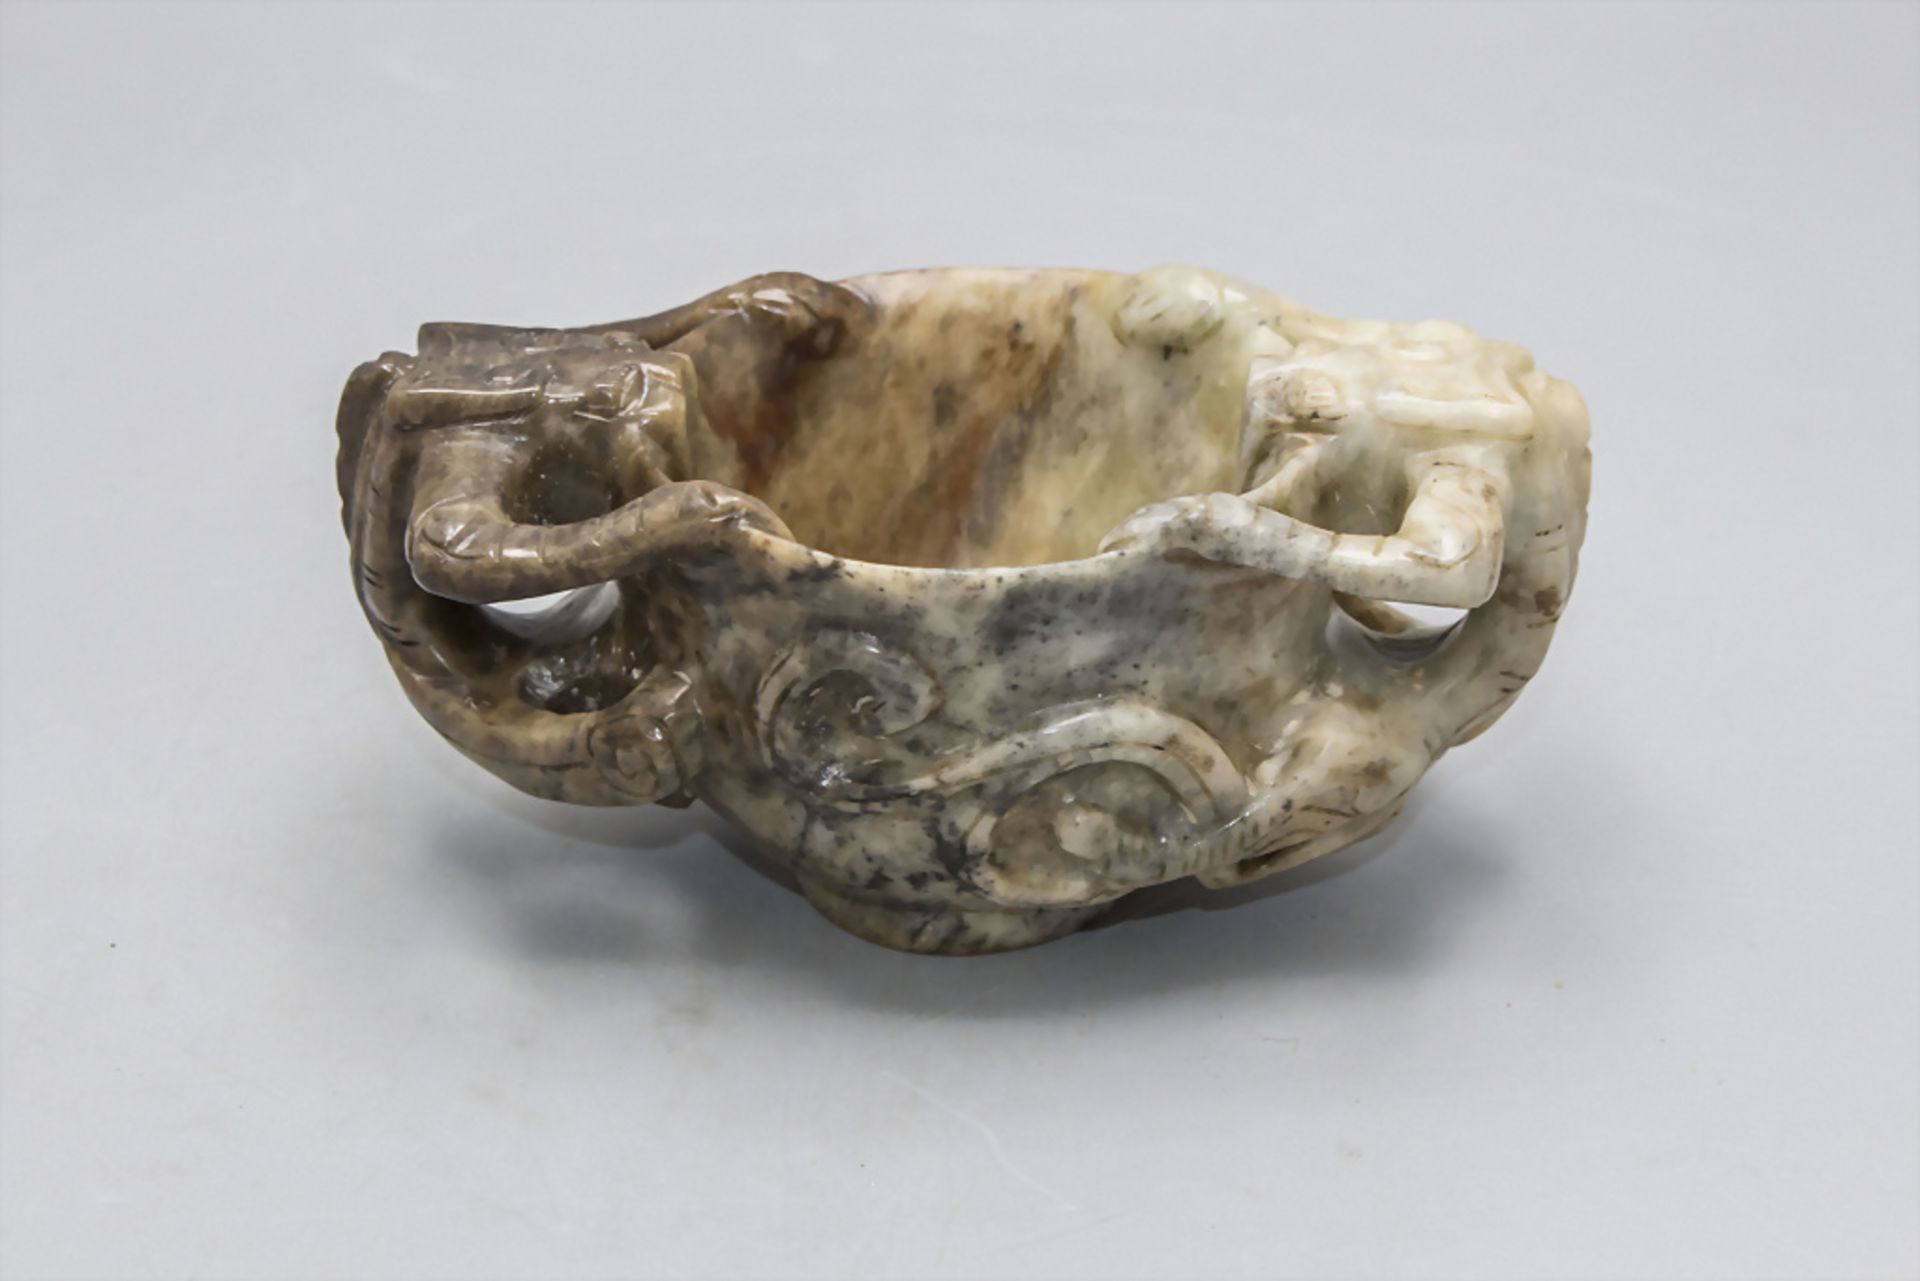 Jadeschale / A jade bowl, China, Qing-Dynastie (1644-1911), 18./19. Jh. - Image 3 of 8